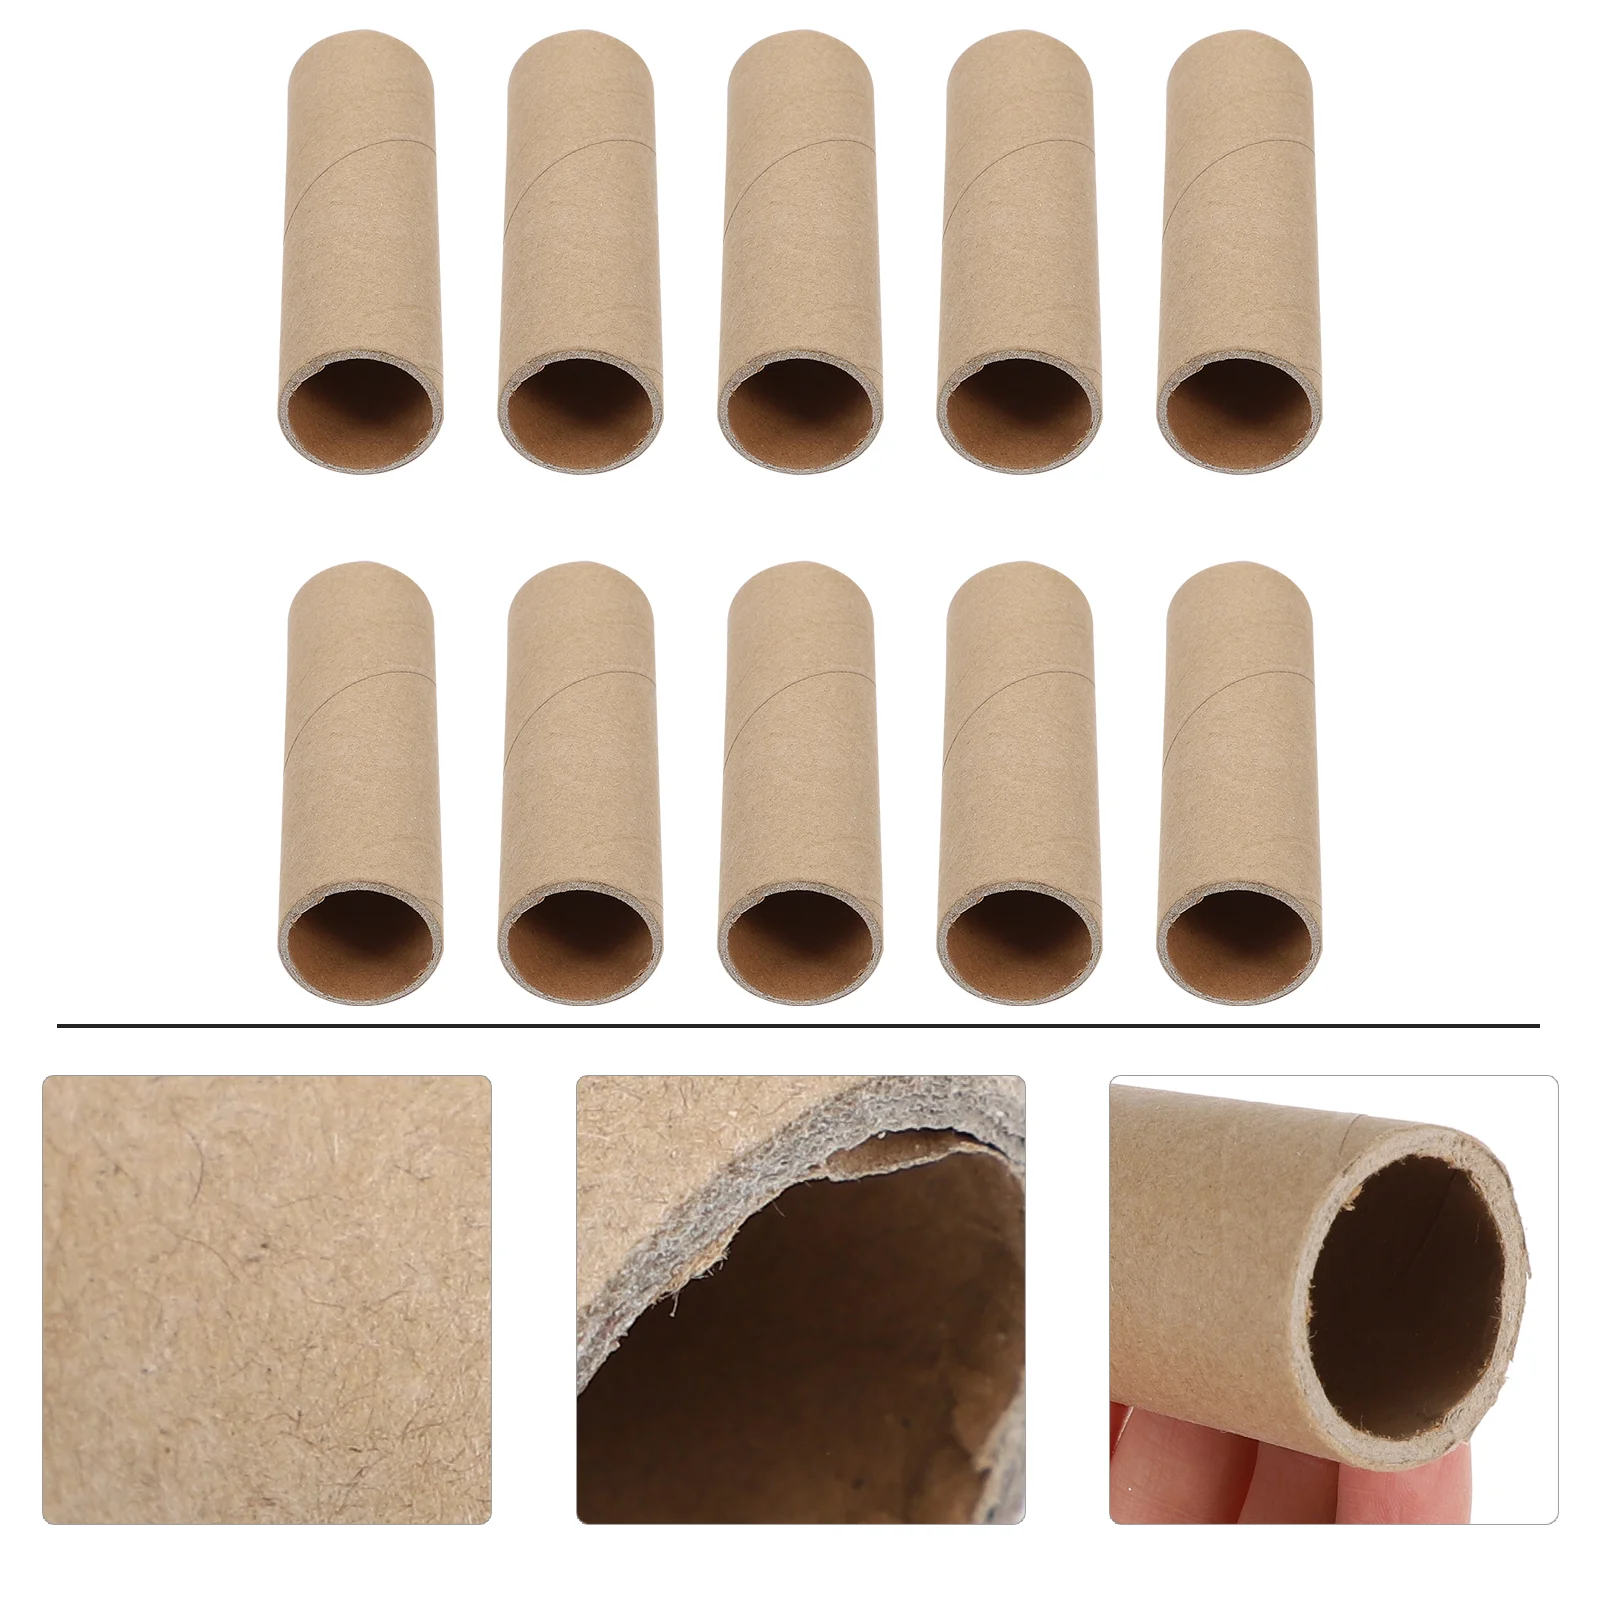 

15pcs Round Paper Tubes DIY Cardboard Tubes Funny Educational Toys for Kids